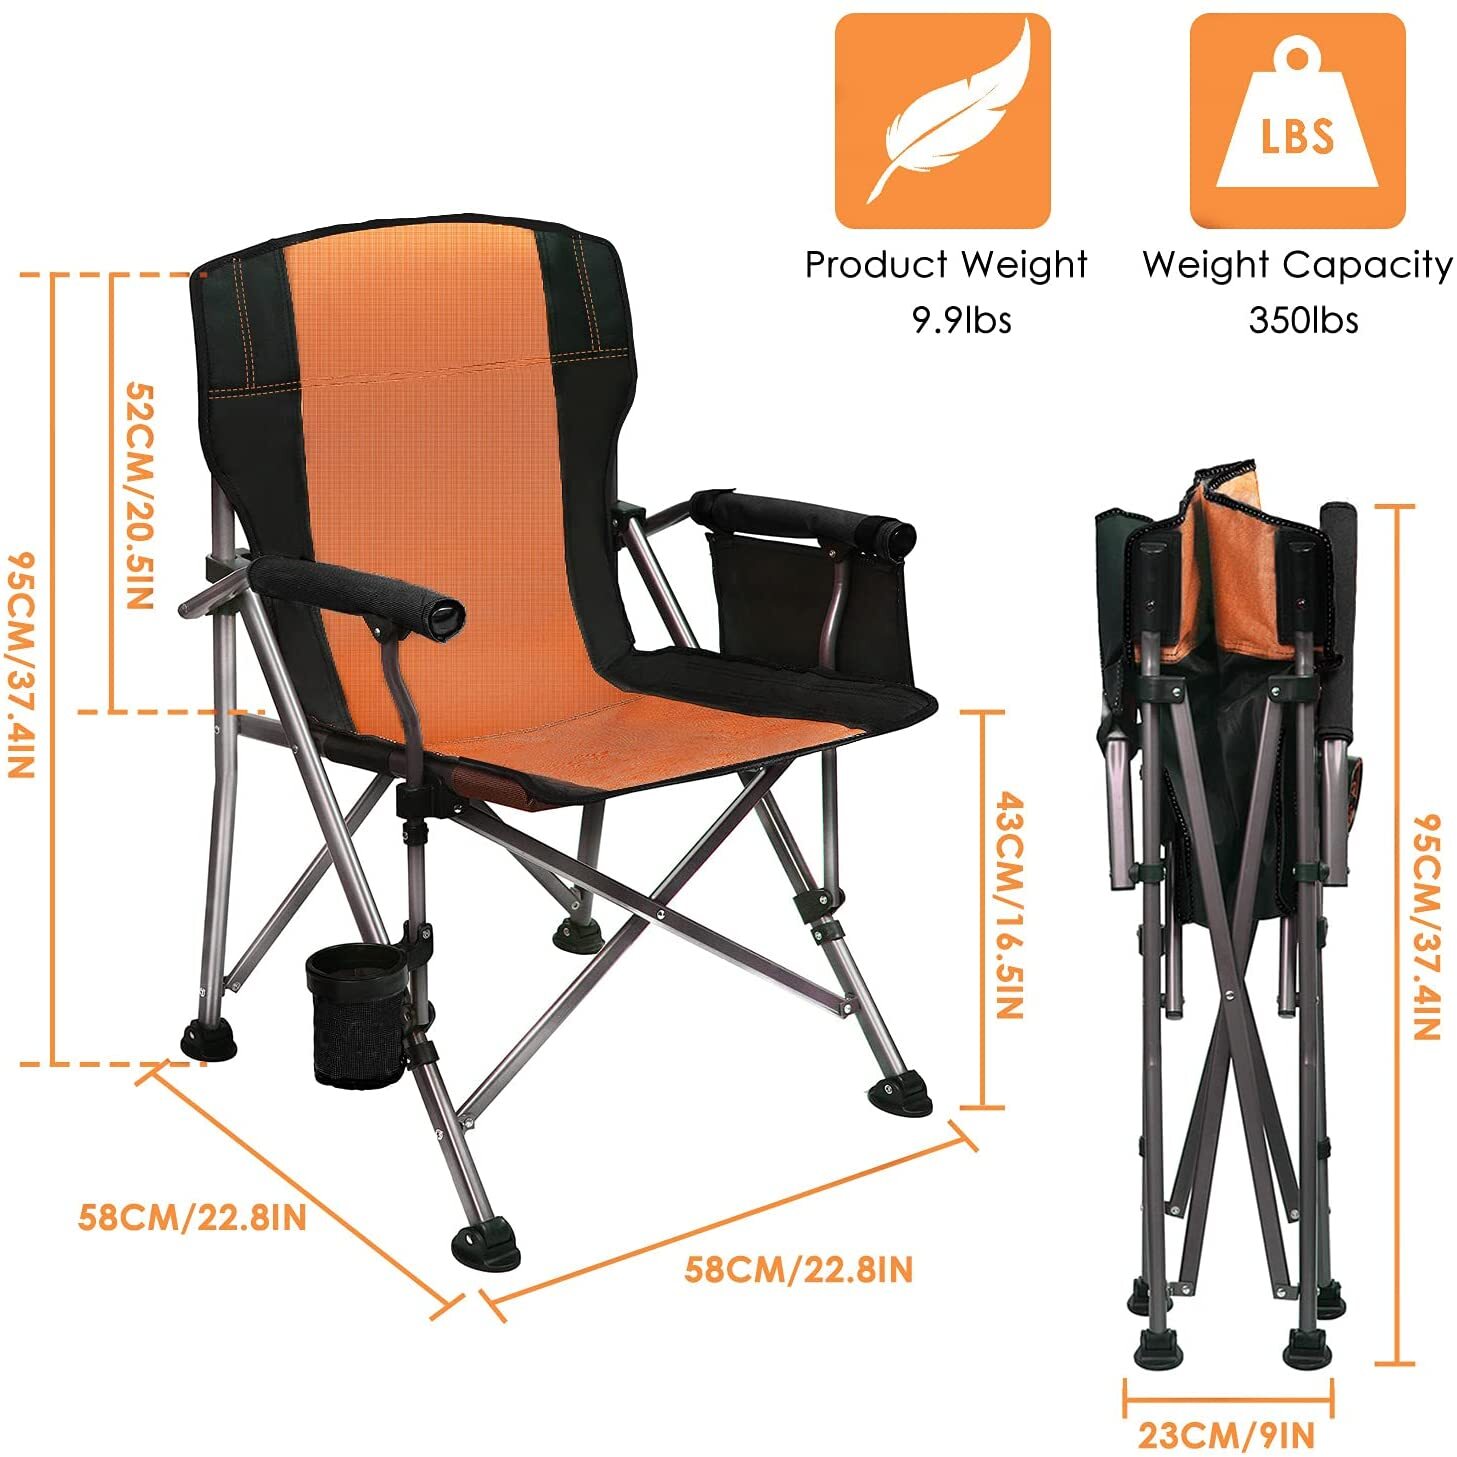 Folding Camping Chair Oversized Collapsible Camp Chair with Cup